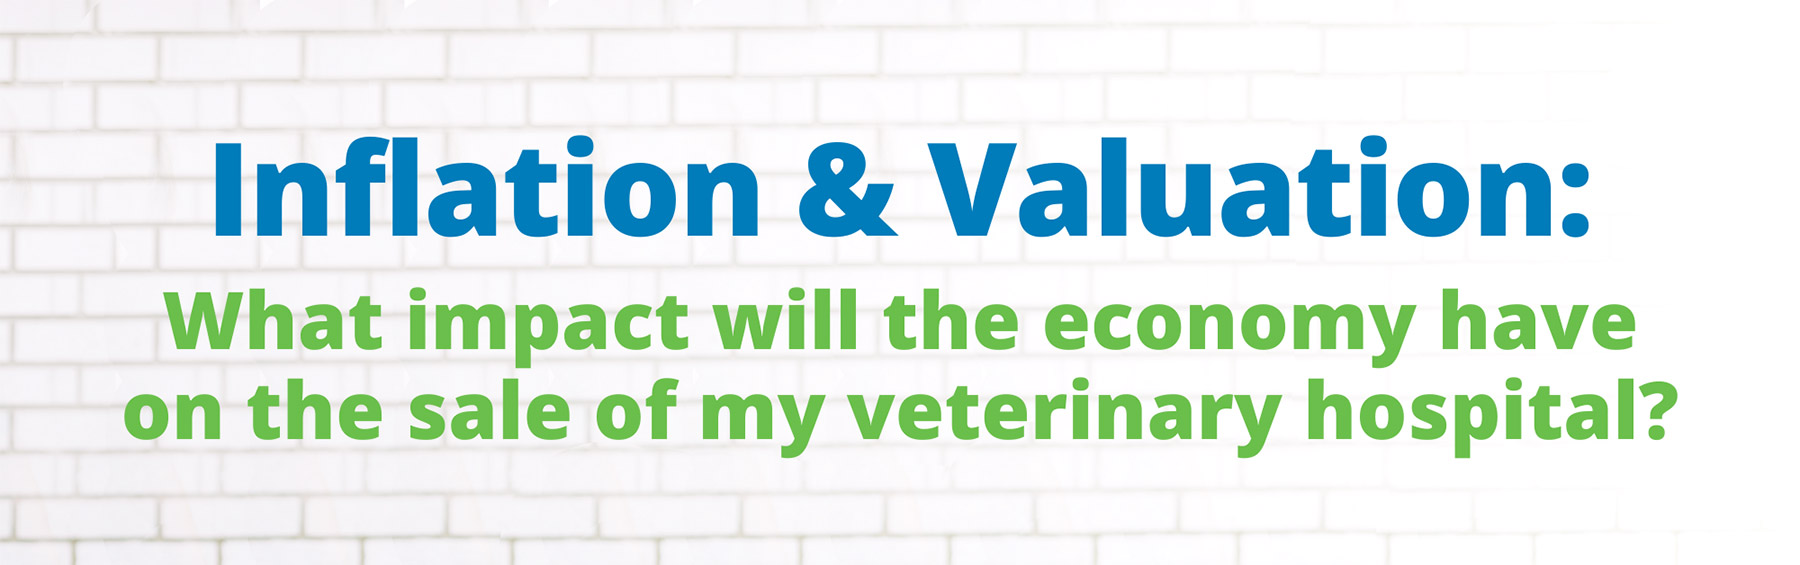 Inflation & Valuation: What Impact Will the Economy Have on the Sale of My Veterinary Hospital?